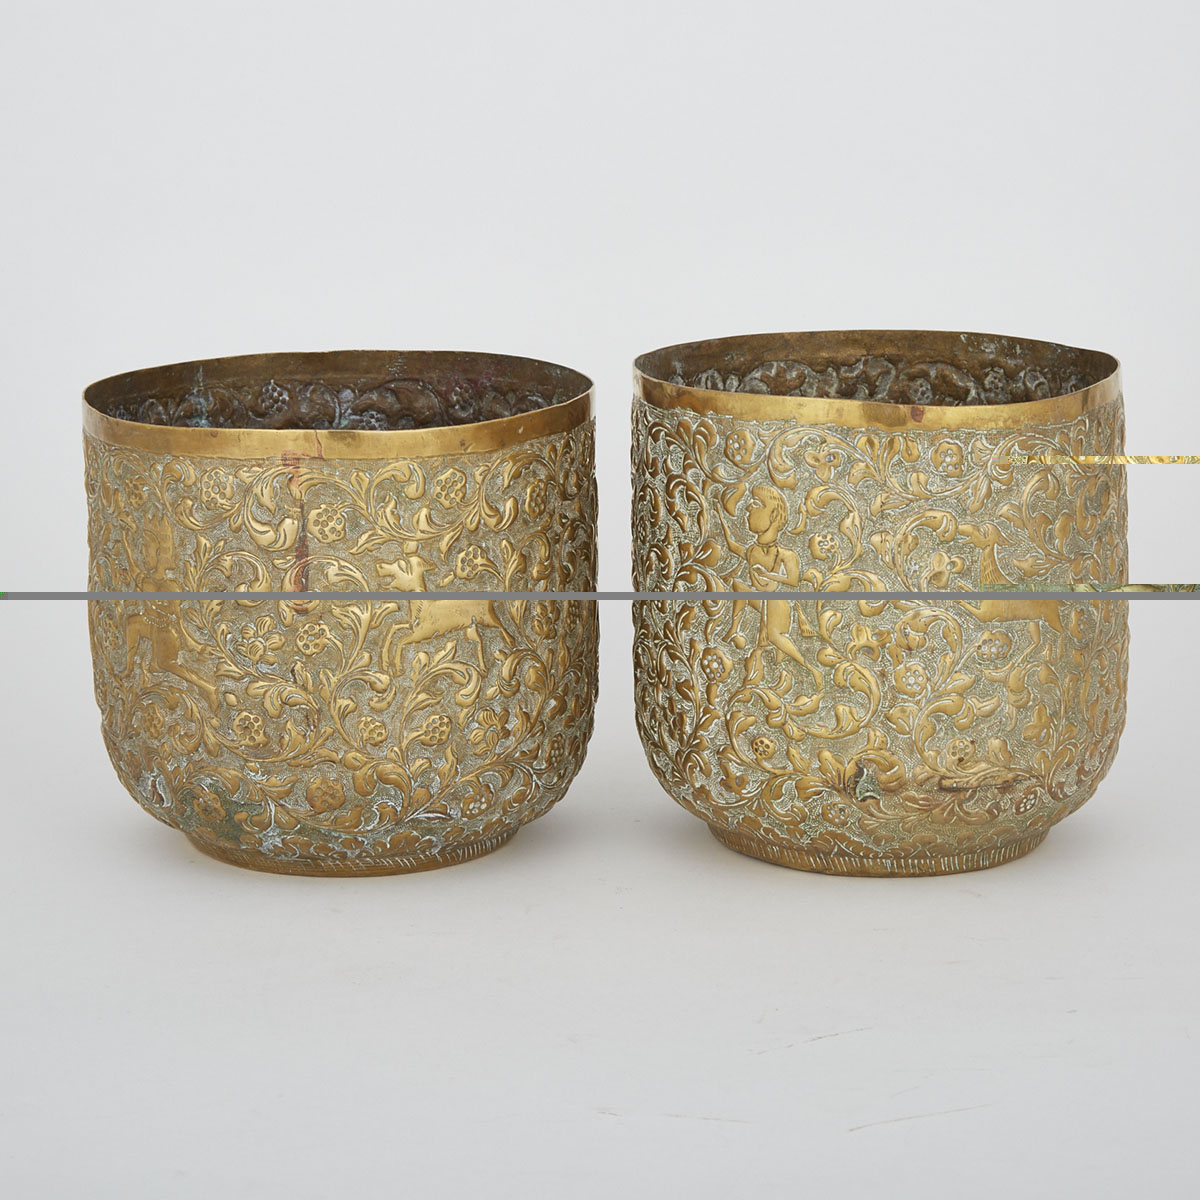 Pair of Bronze Indian Vessels, Early 20th Century